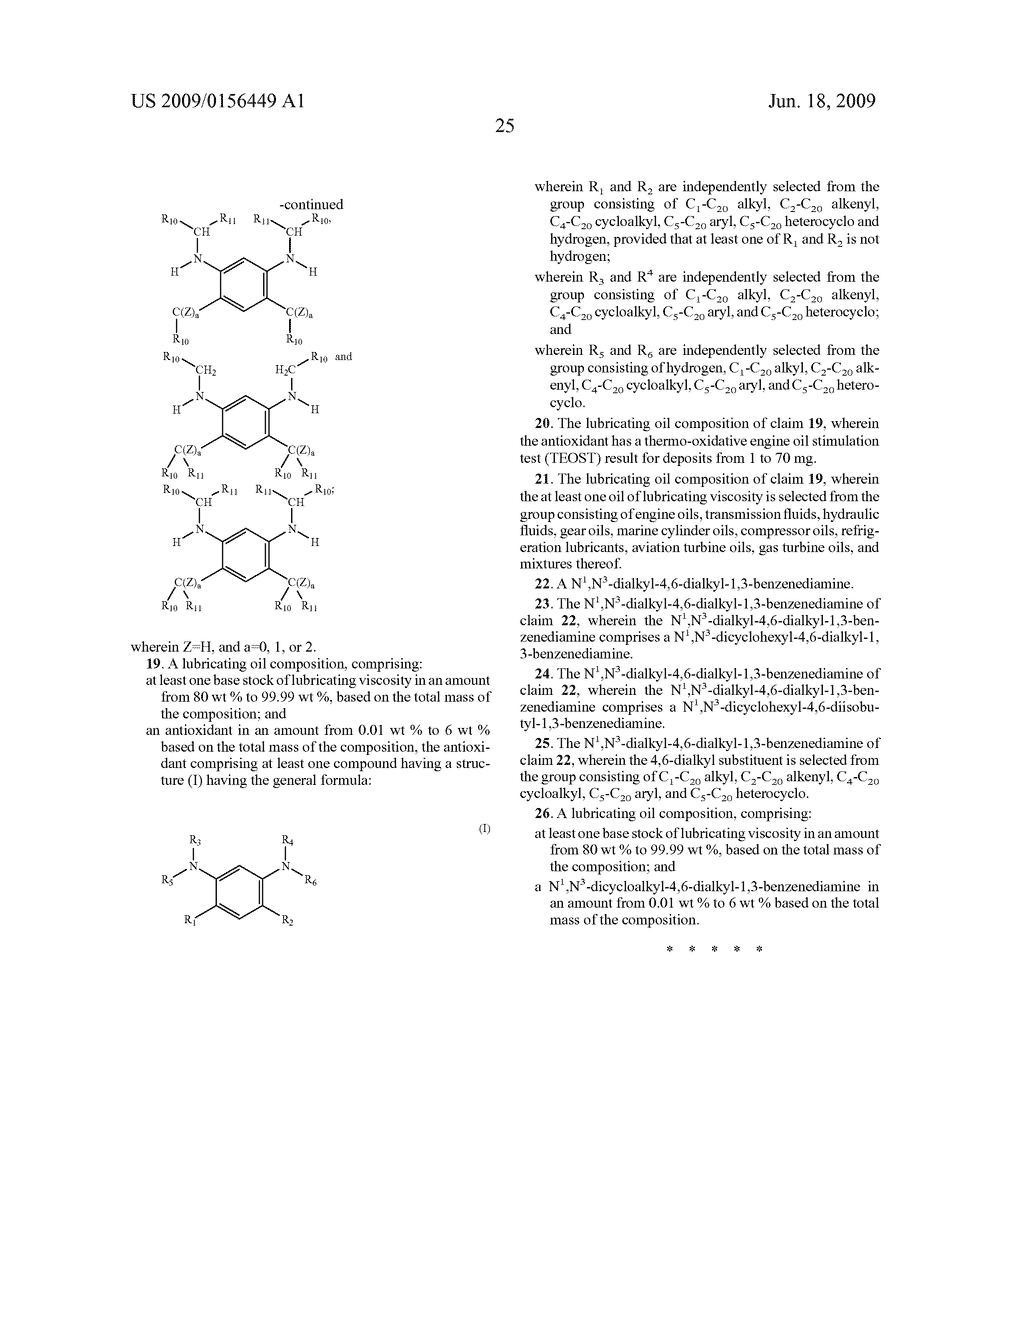 ALKYLATED 1,3-BENZENEDIAMINE COMPOUNDS AND METHODS FOR PRODUCING SAME - diagram, schematic, and image 26